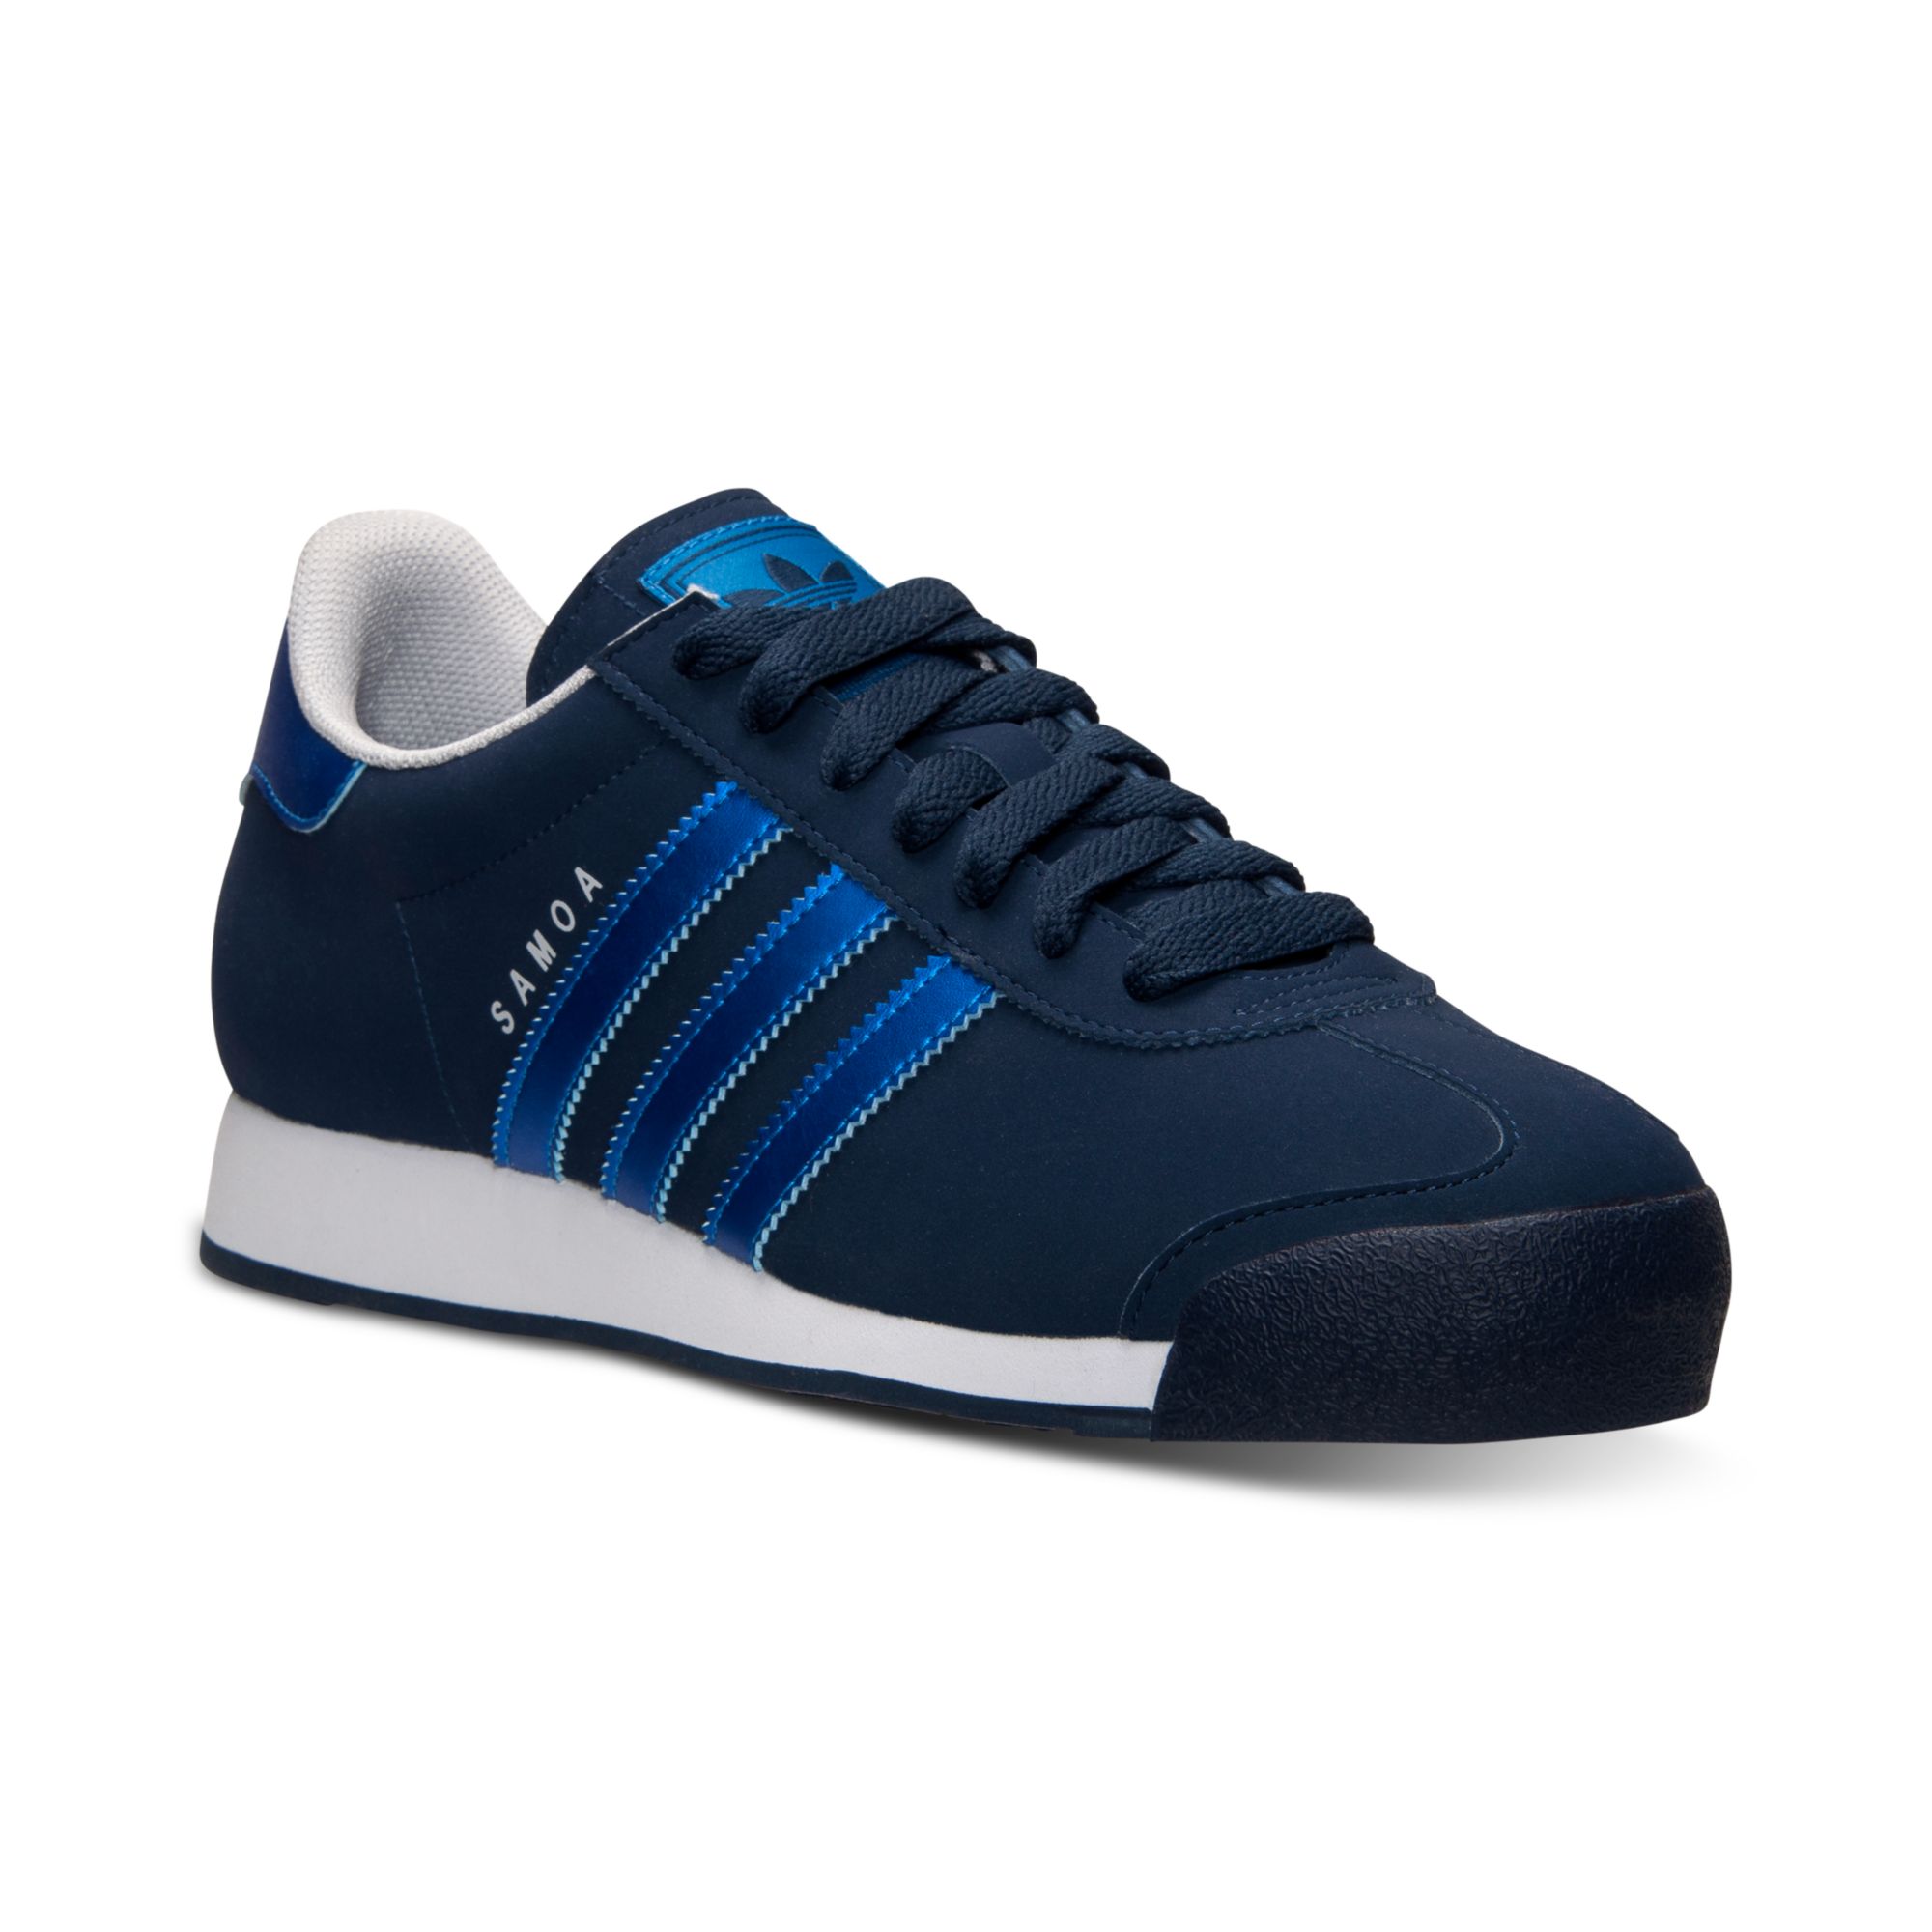 adidas Men'S Samoa Casual Sneakers From Finish Line in Navy/Blue/White (Blue)  for Men - Lyst